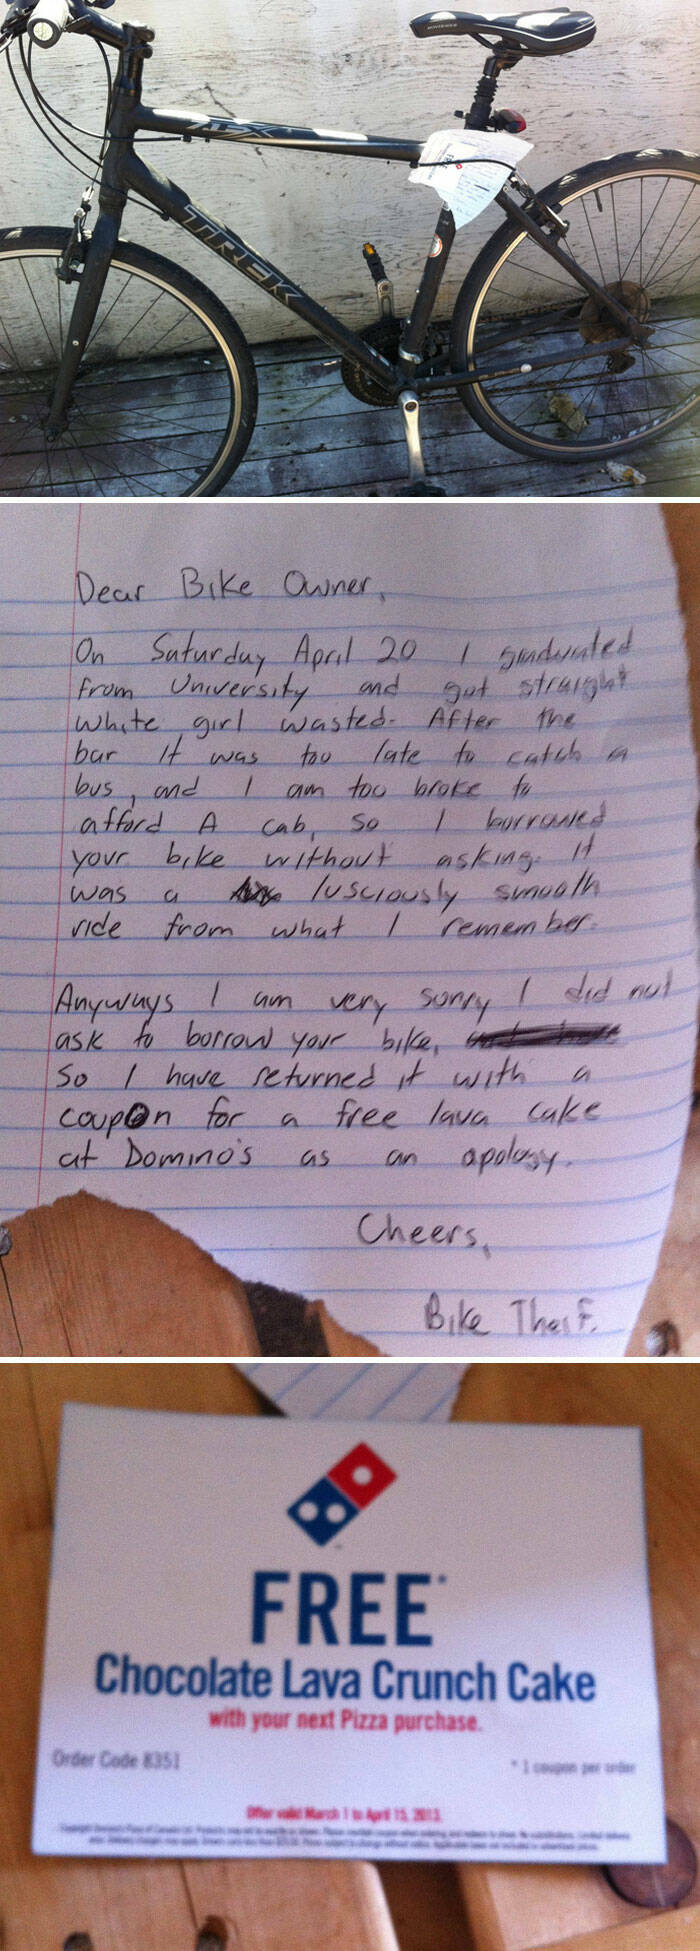 Laugh-Out-Loud Apology Notes That Stole The Show